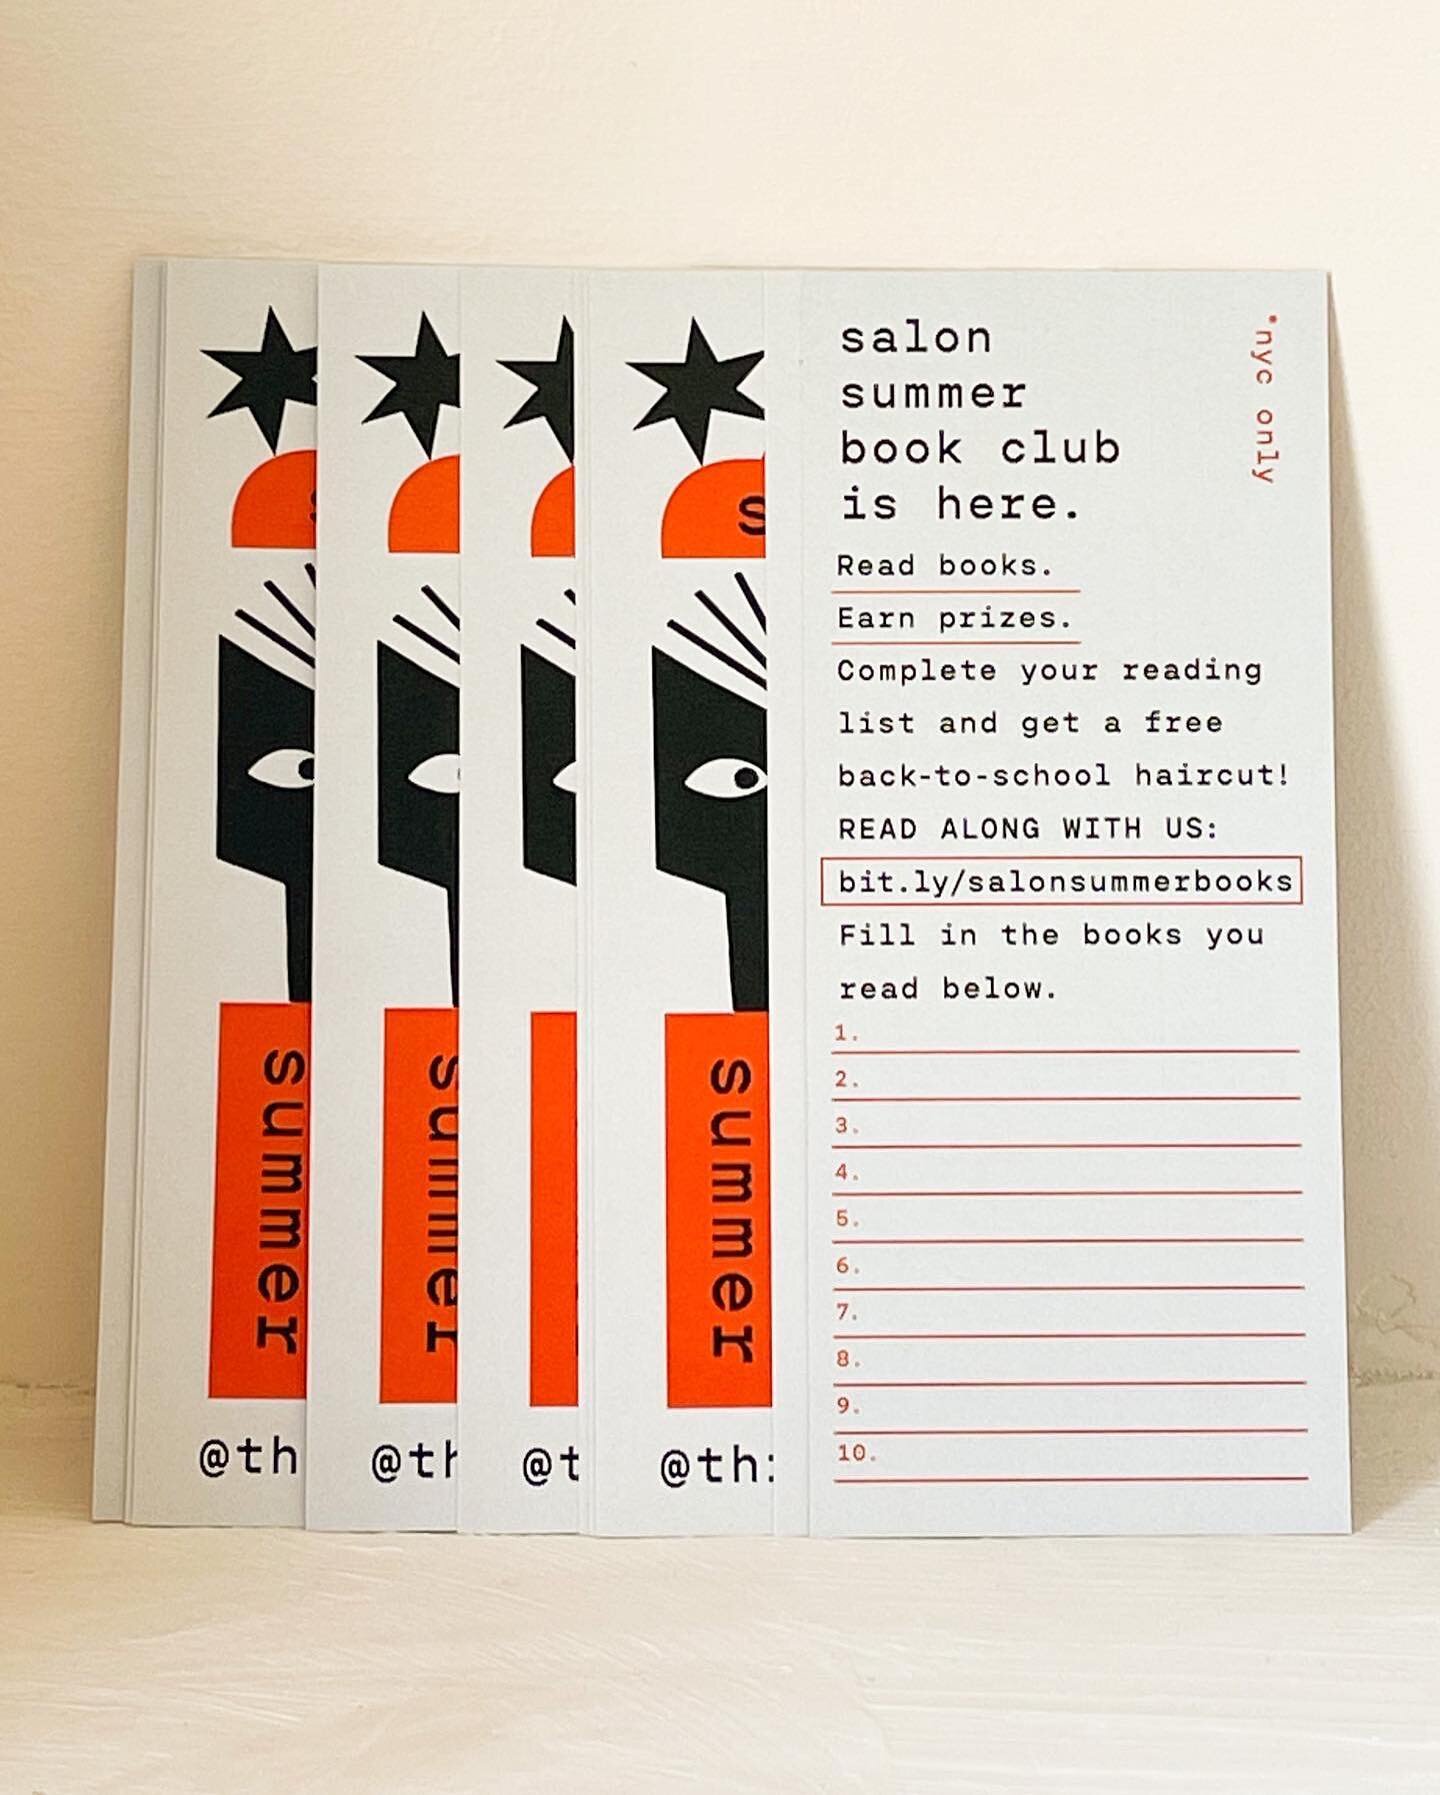 Track your reading with one of our Summer Book Club bookmarks. Pick one up at @thisissalon or @cafeconlibros_bk 

If you&rsquo;re a hair salon, bookstore, or community center that wants to have a stack of bookmarks to share with your community let us